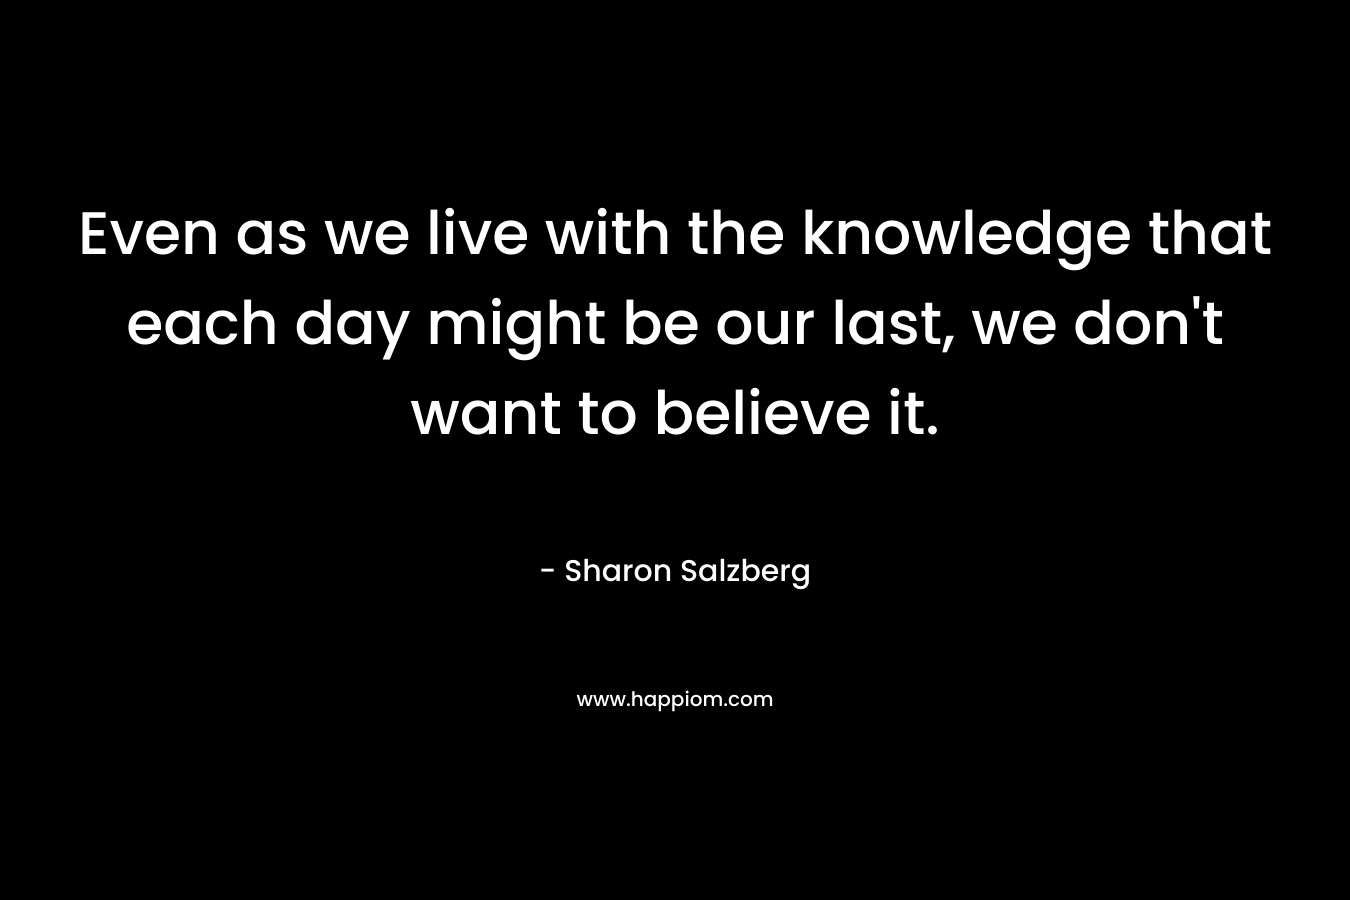 Even as we live with the knowledge that each day might be our last, we don’t want to believe it. – Sharon Salzberg